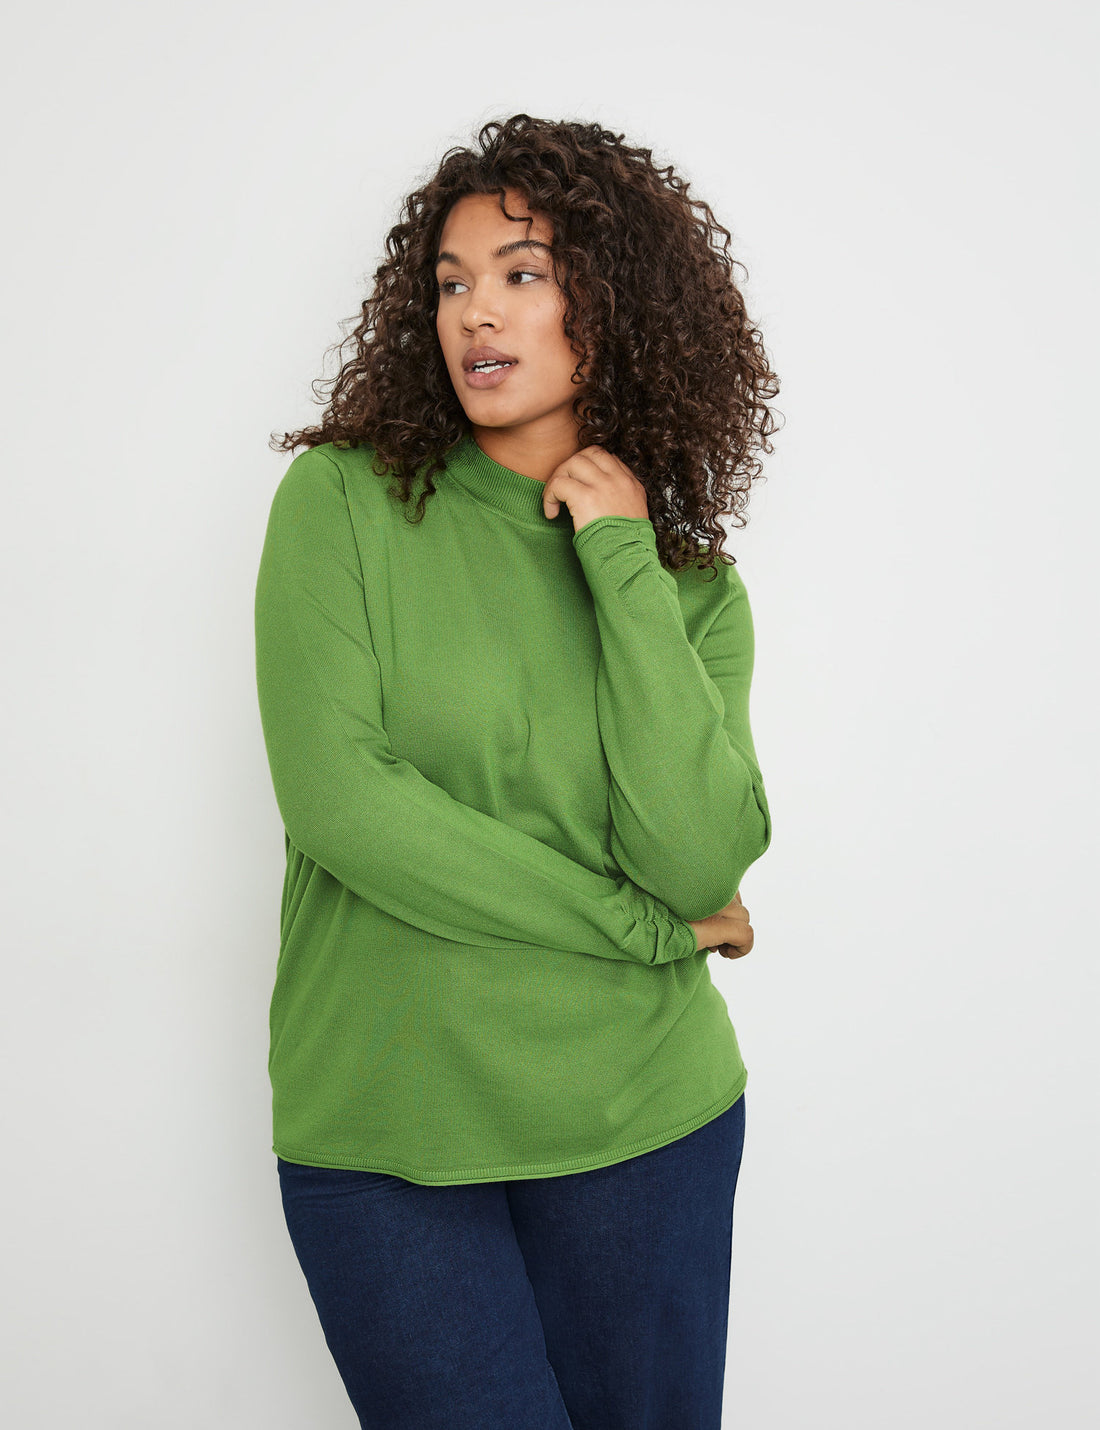 Fine Knit Jumper With Gathers On The Sleeves_372217-25400_5560_01